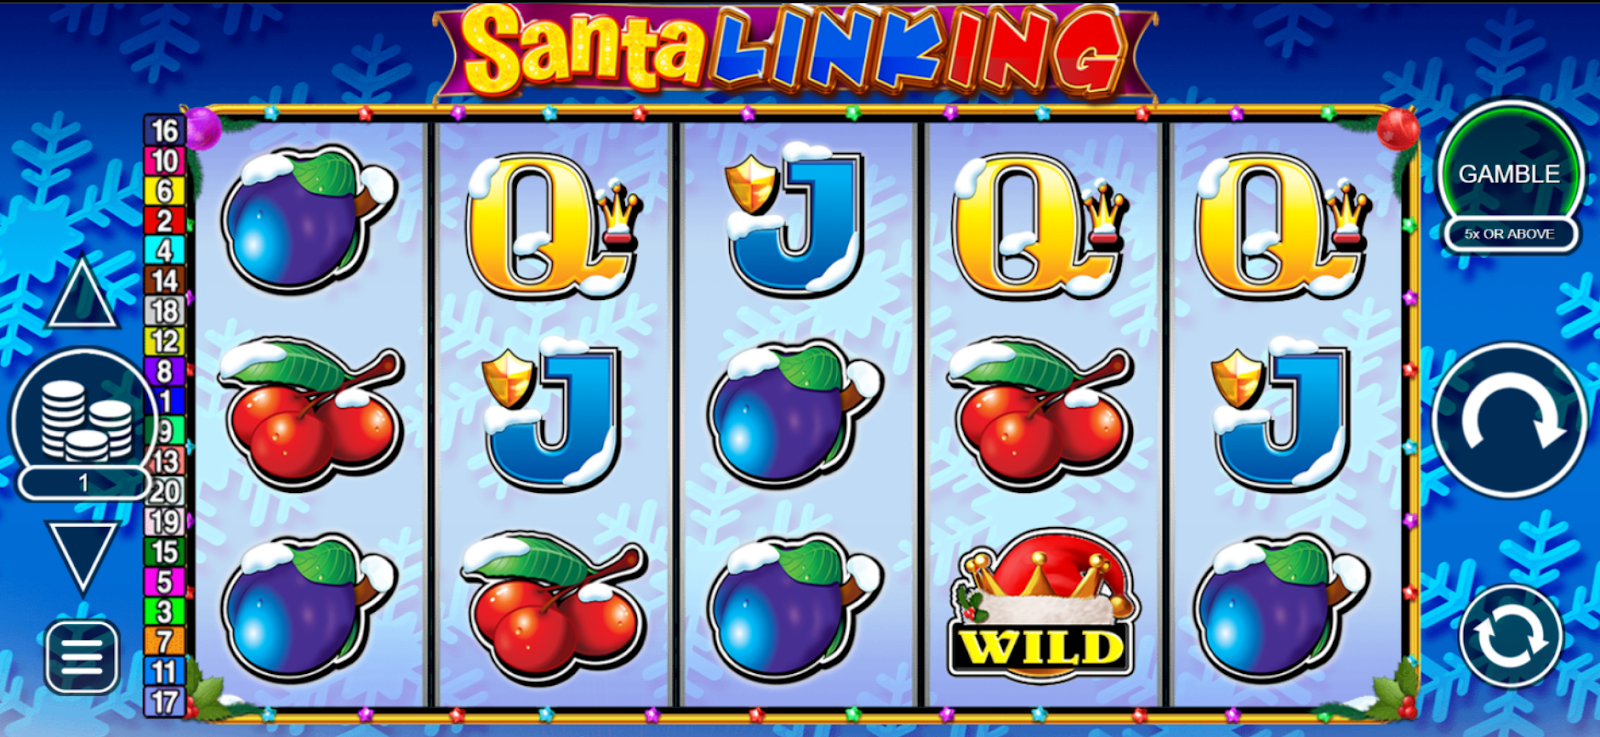 A screen shot of a slot machine

Description automatically generated